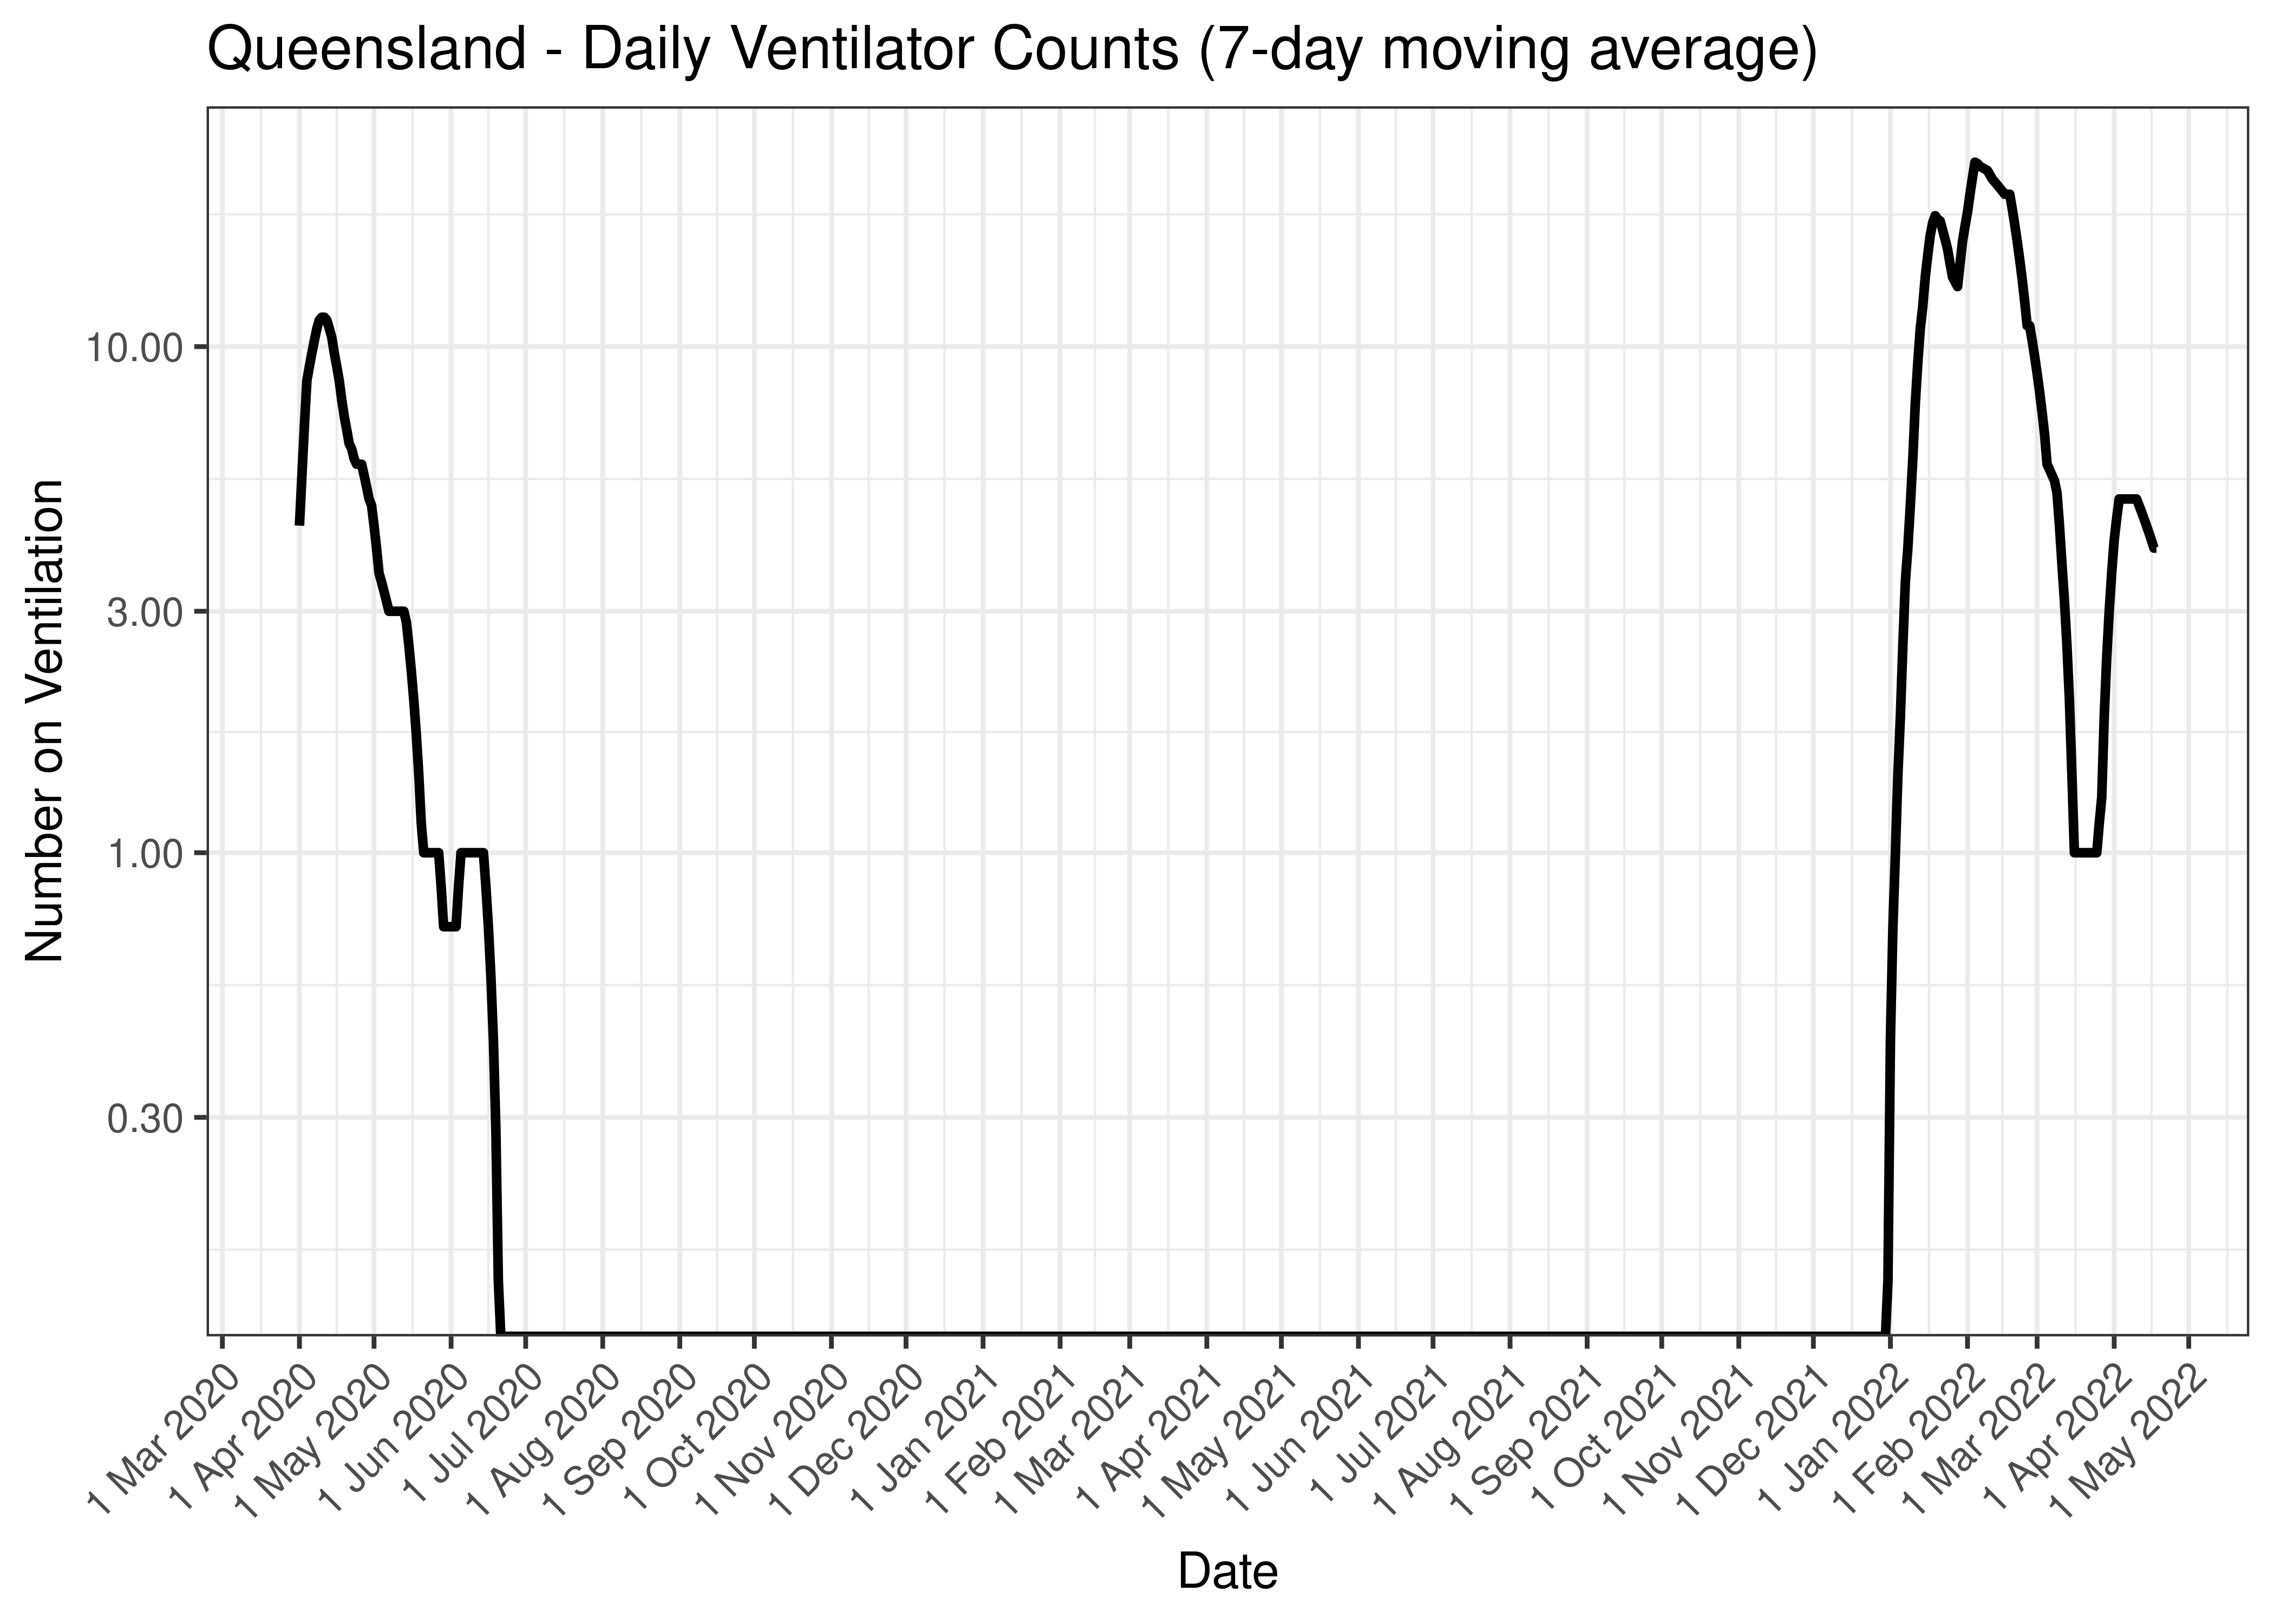 Queensland - Daily Ventilator Counts (7-day moving average)